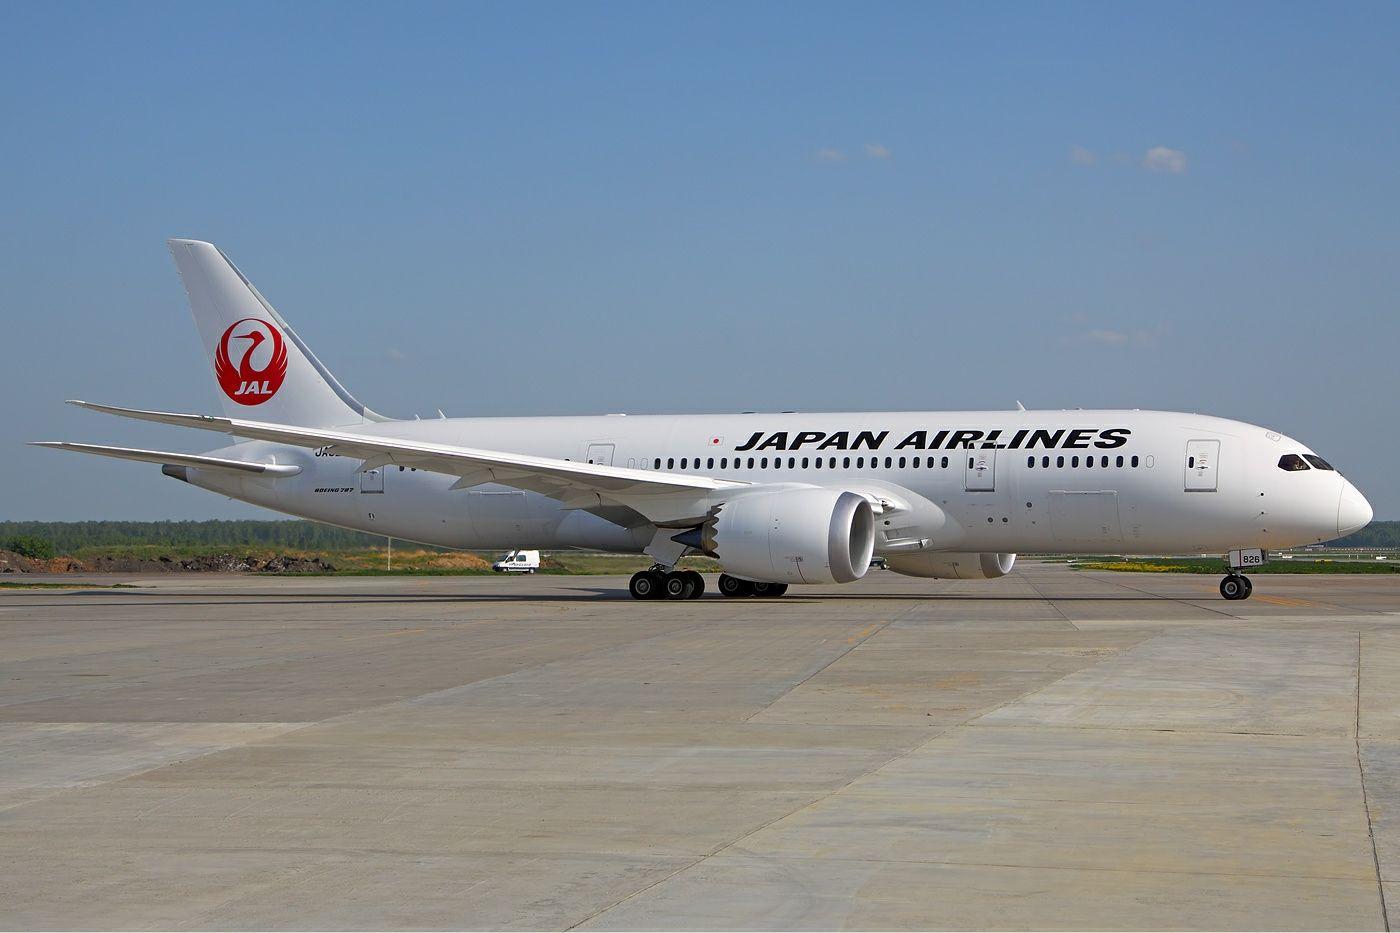 Old Jal Logo - JAL Group FY2013 & Monthly (March 2014) Traffic Data ·ETB Travel ...